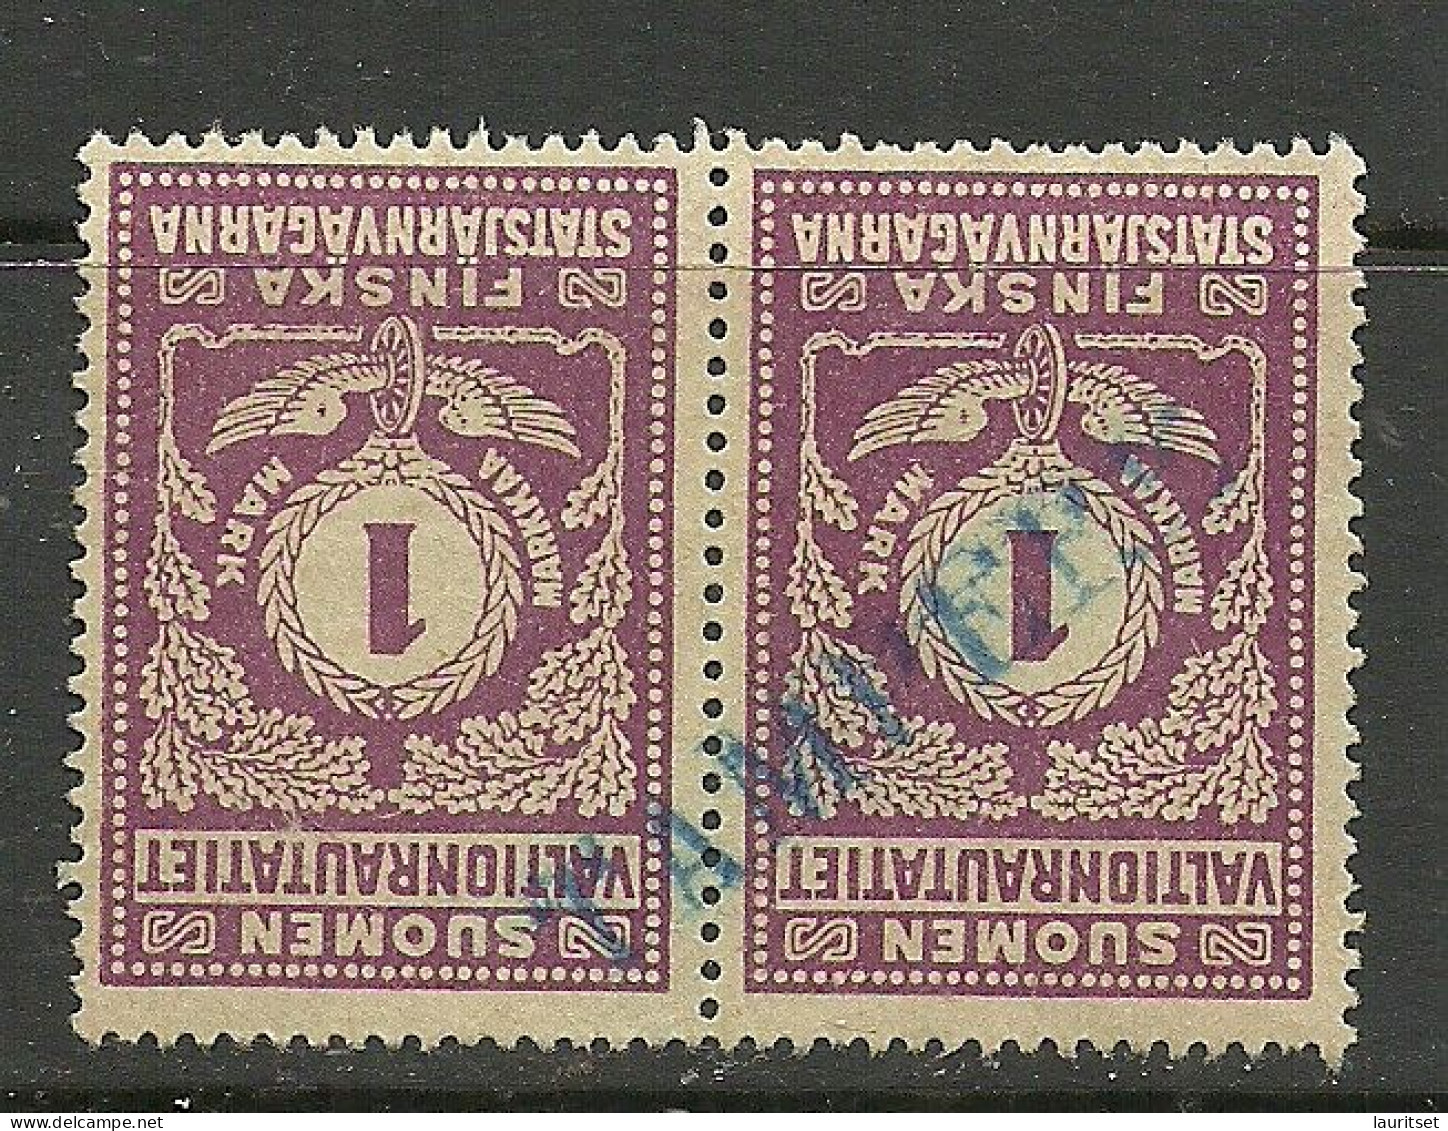 FINLAND FINNLAND 1920/1921 Railway Stamps State Railway 1 MK As Pair Tampere - Parcel Post